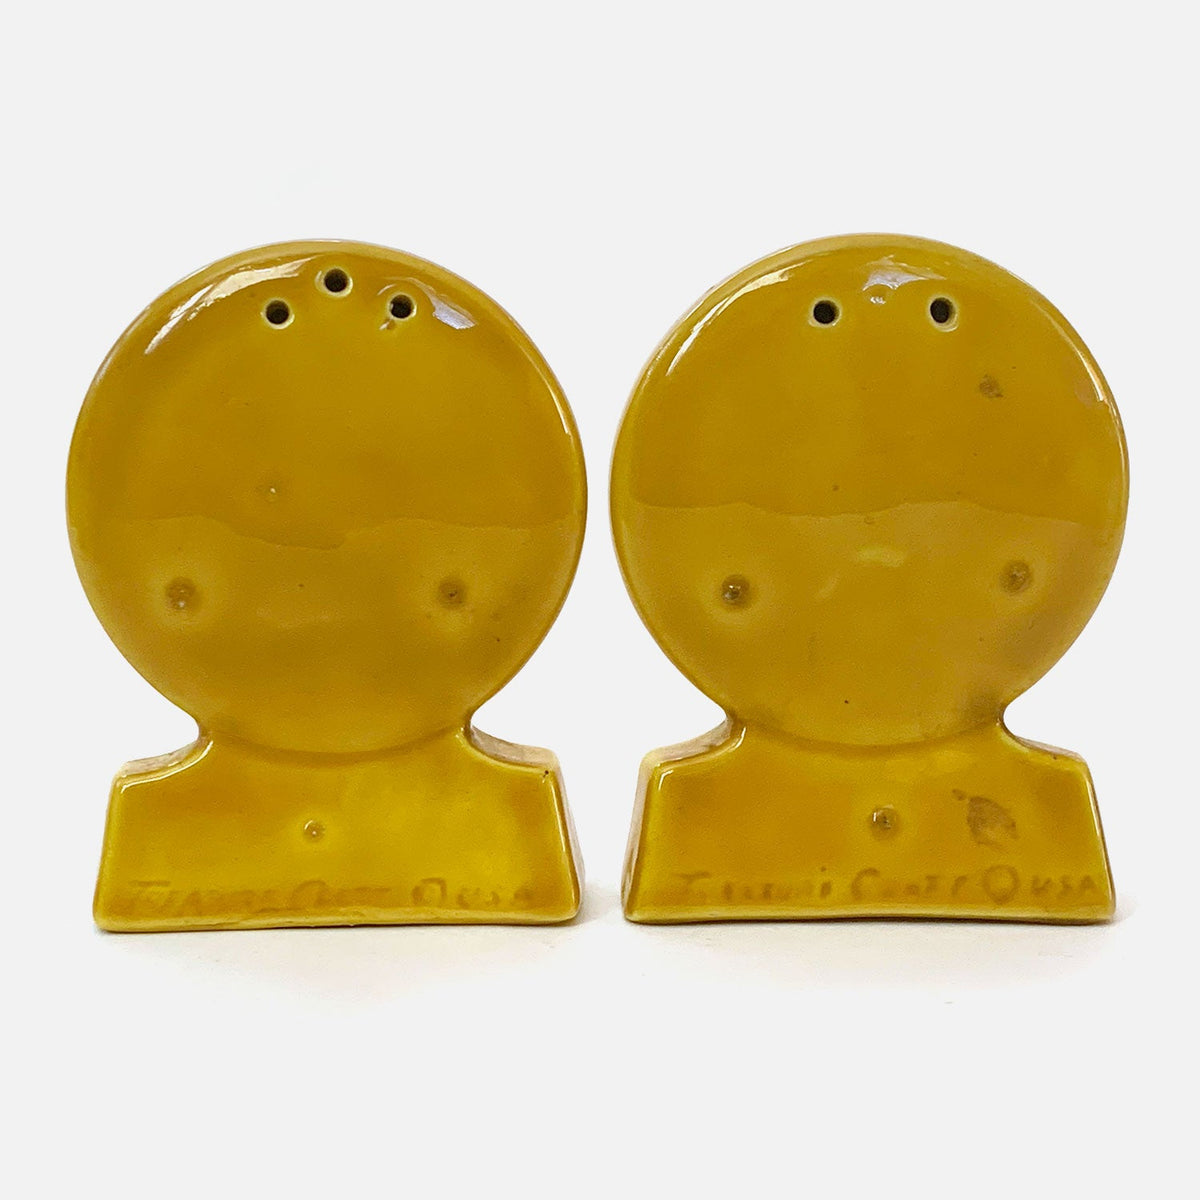 Vintage &quot;Have A Happy Day&quot;  Smiley Salt and Pepper Shakers with Cork Stoppers